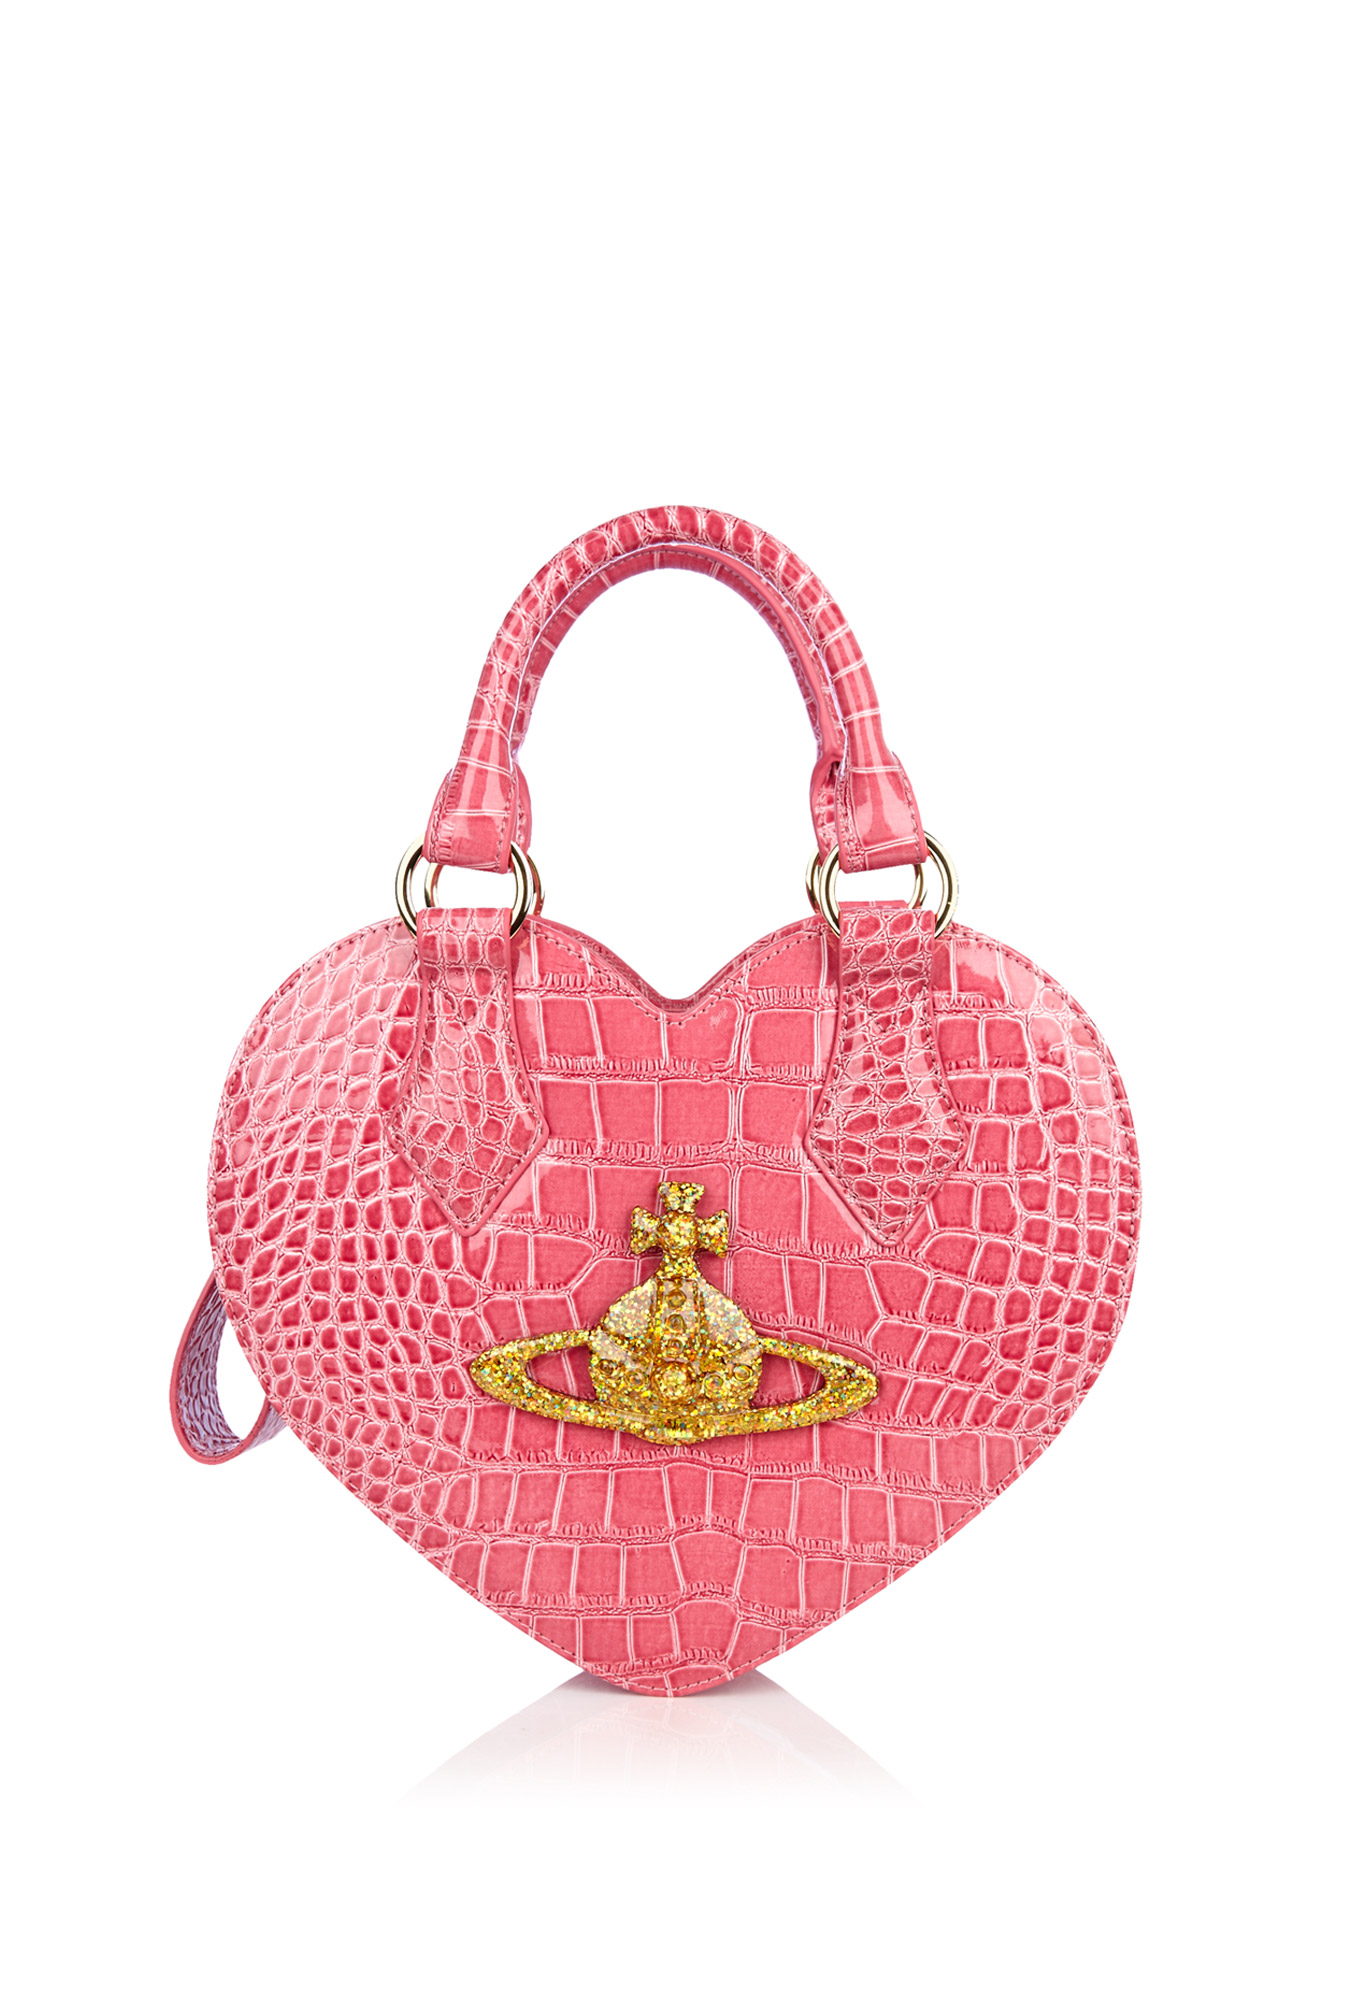 Vivienne Westwood Rosa Chancery Heart Bag in Pink | Lyst